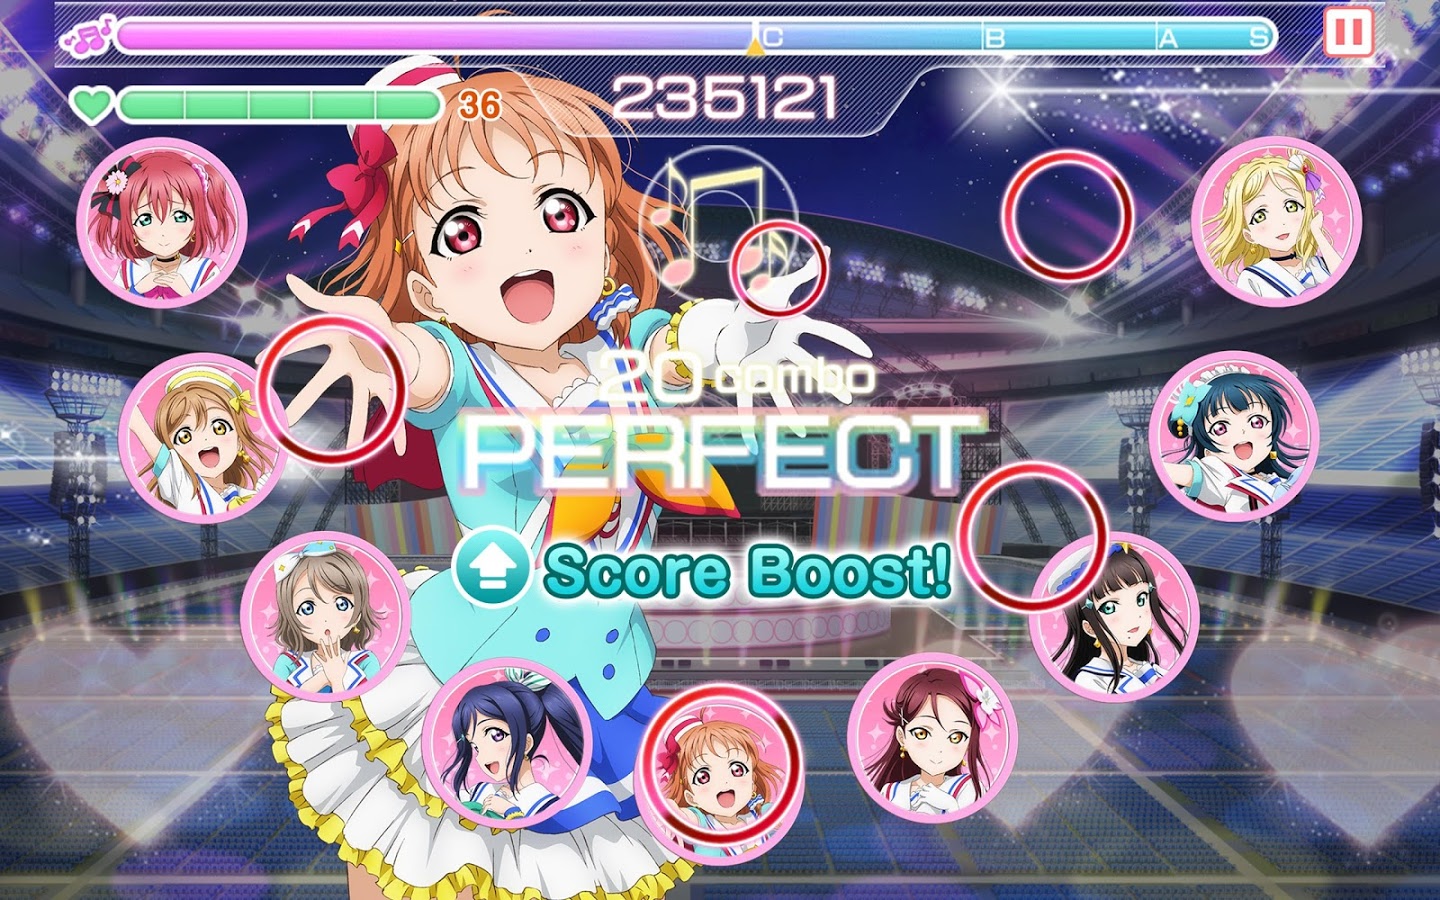 A joyful femme looking person with arms outstretched. Two score bars at the top of screen. Multiple femme looking faces in circles are spread out over the screen. Text reads 'Perfect!'.